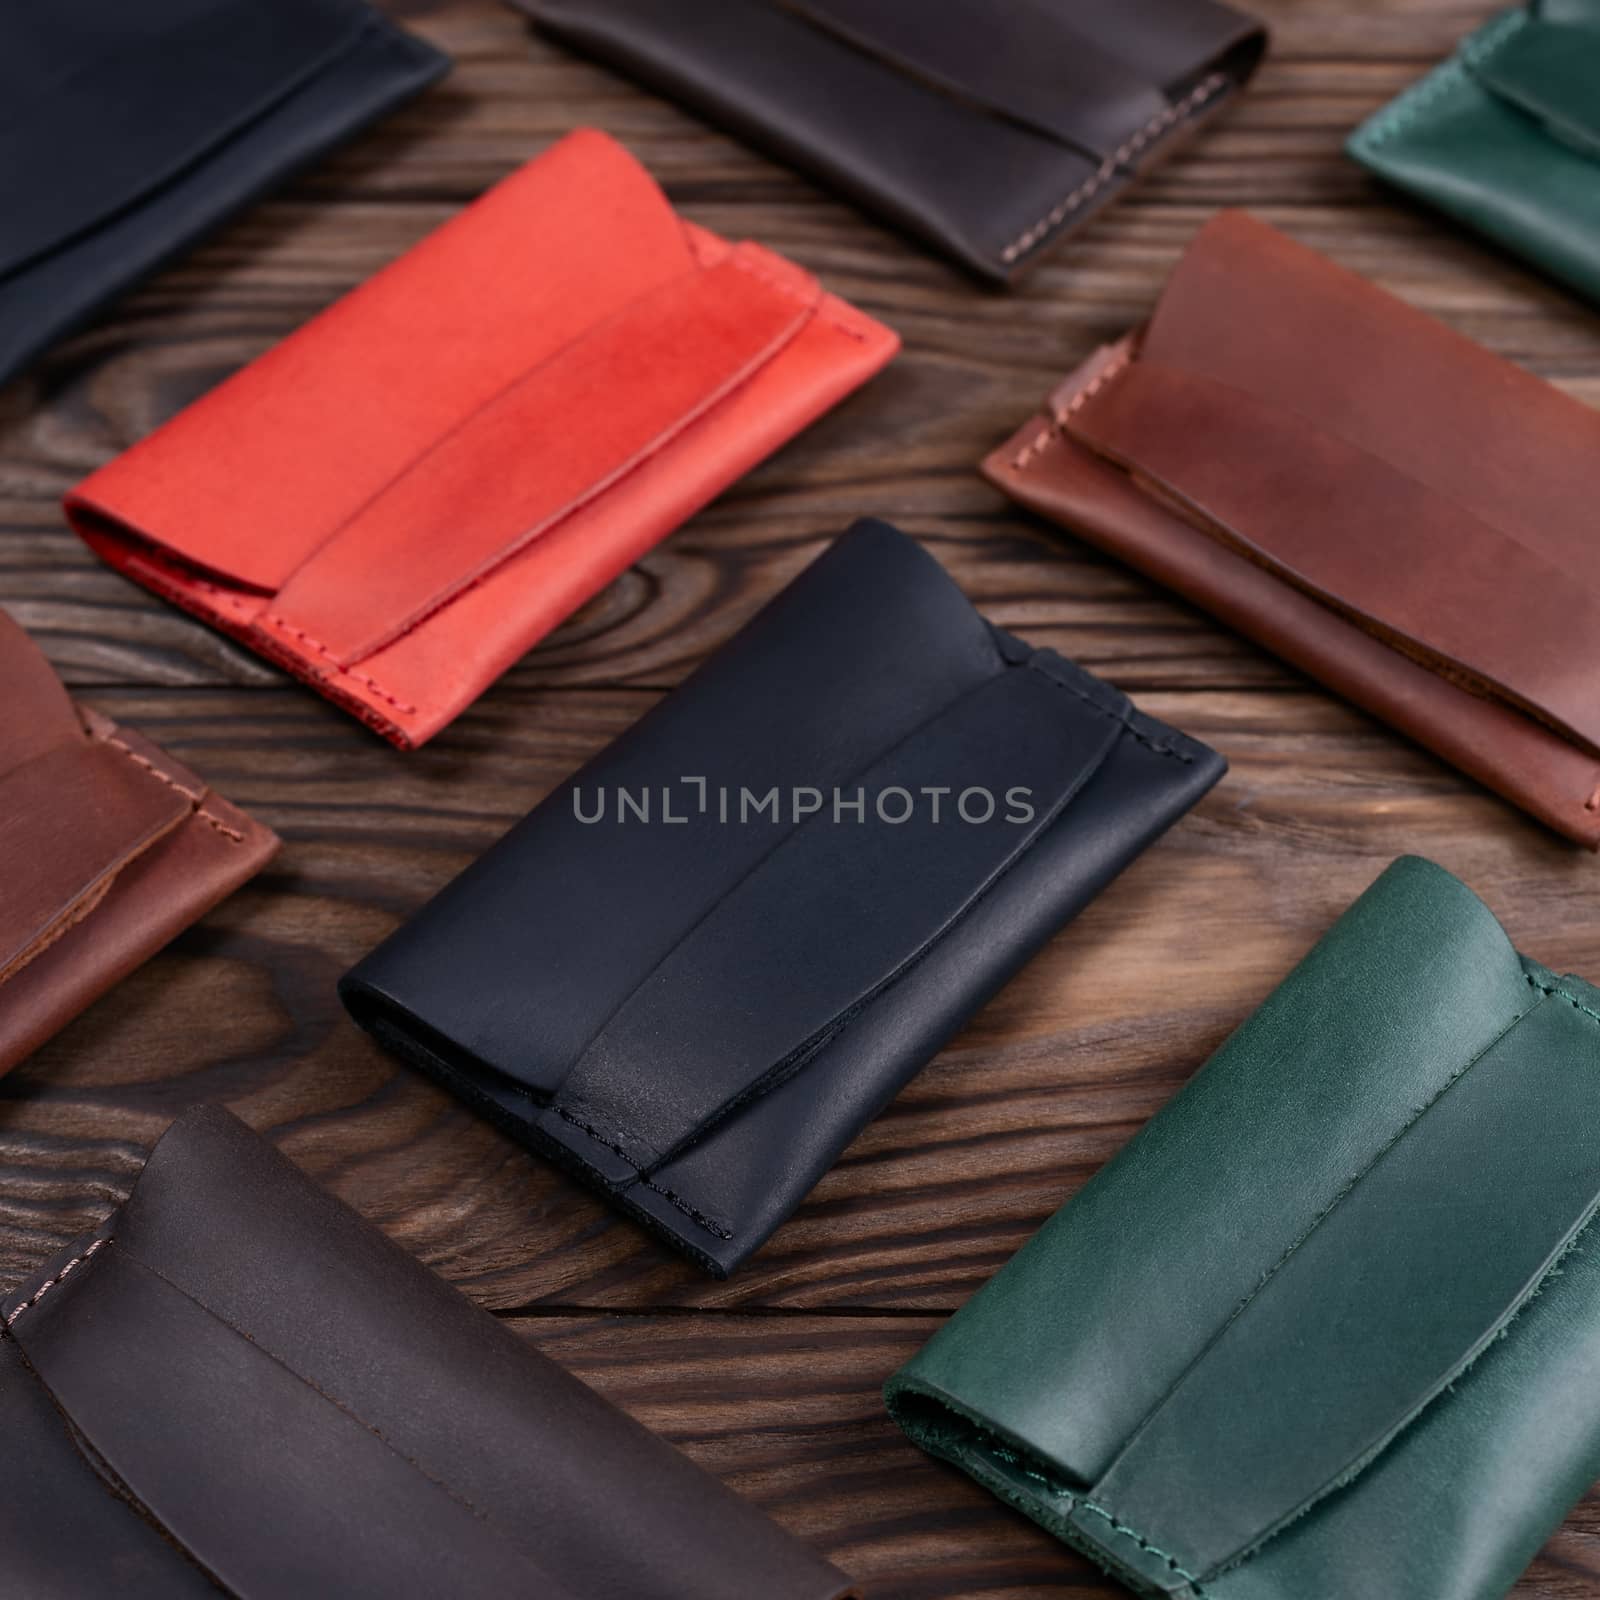 Flat lay photo of five different colour handmade leather one pocket cardholders.  Red, black, blown, ginger and green colors. Stock photo on wooden background.